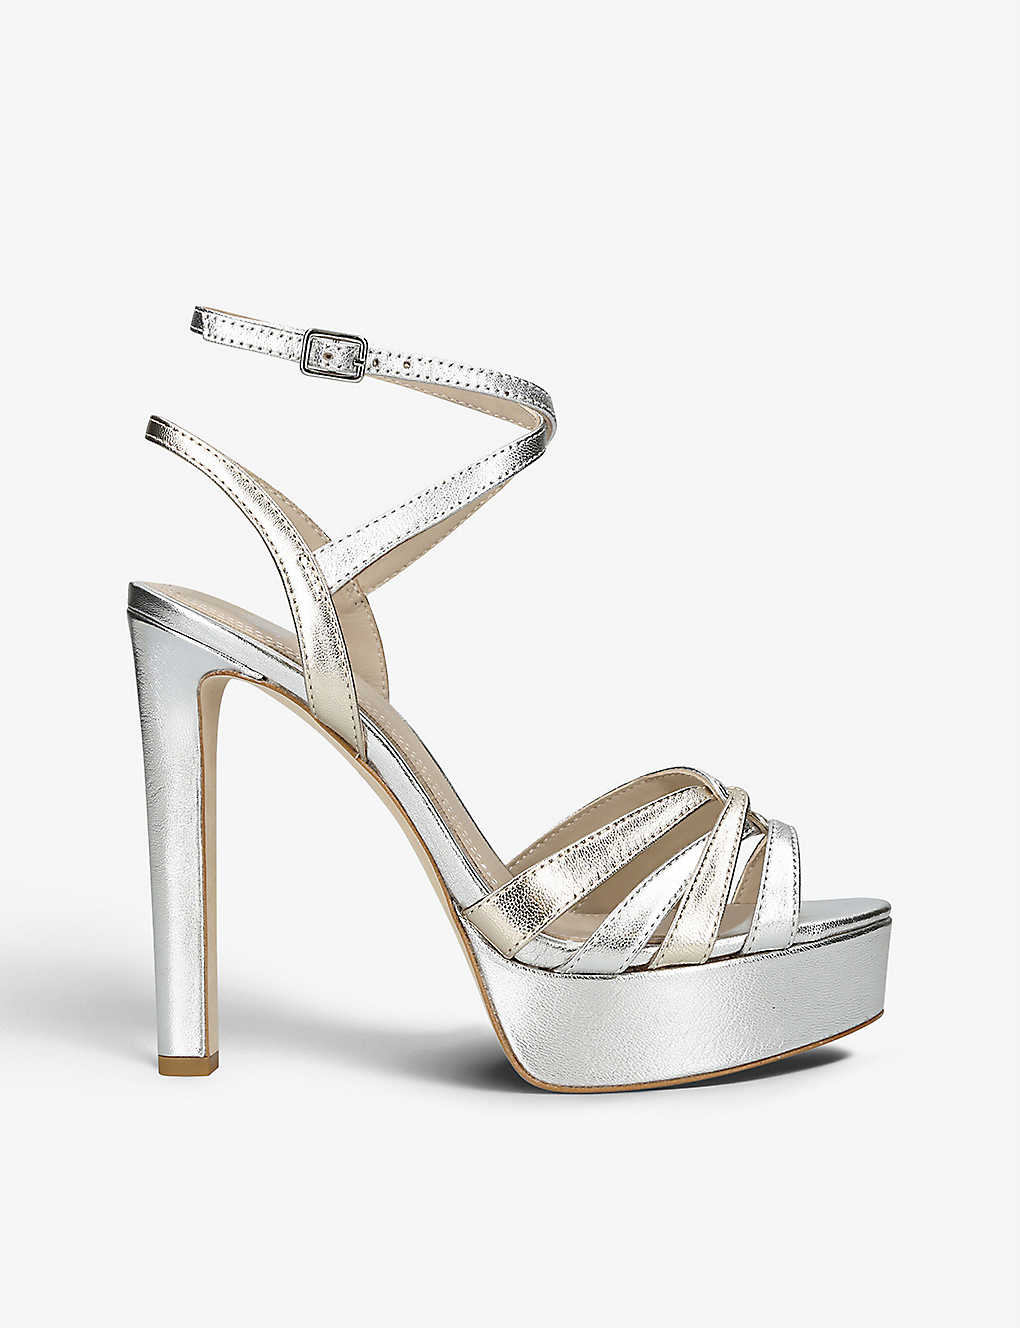 Shop Paige Women's Silver Com Charlee Strappy Metallic Leather Sandals